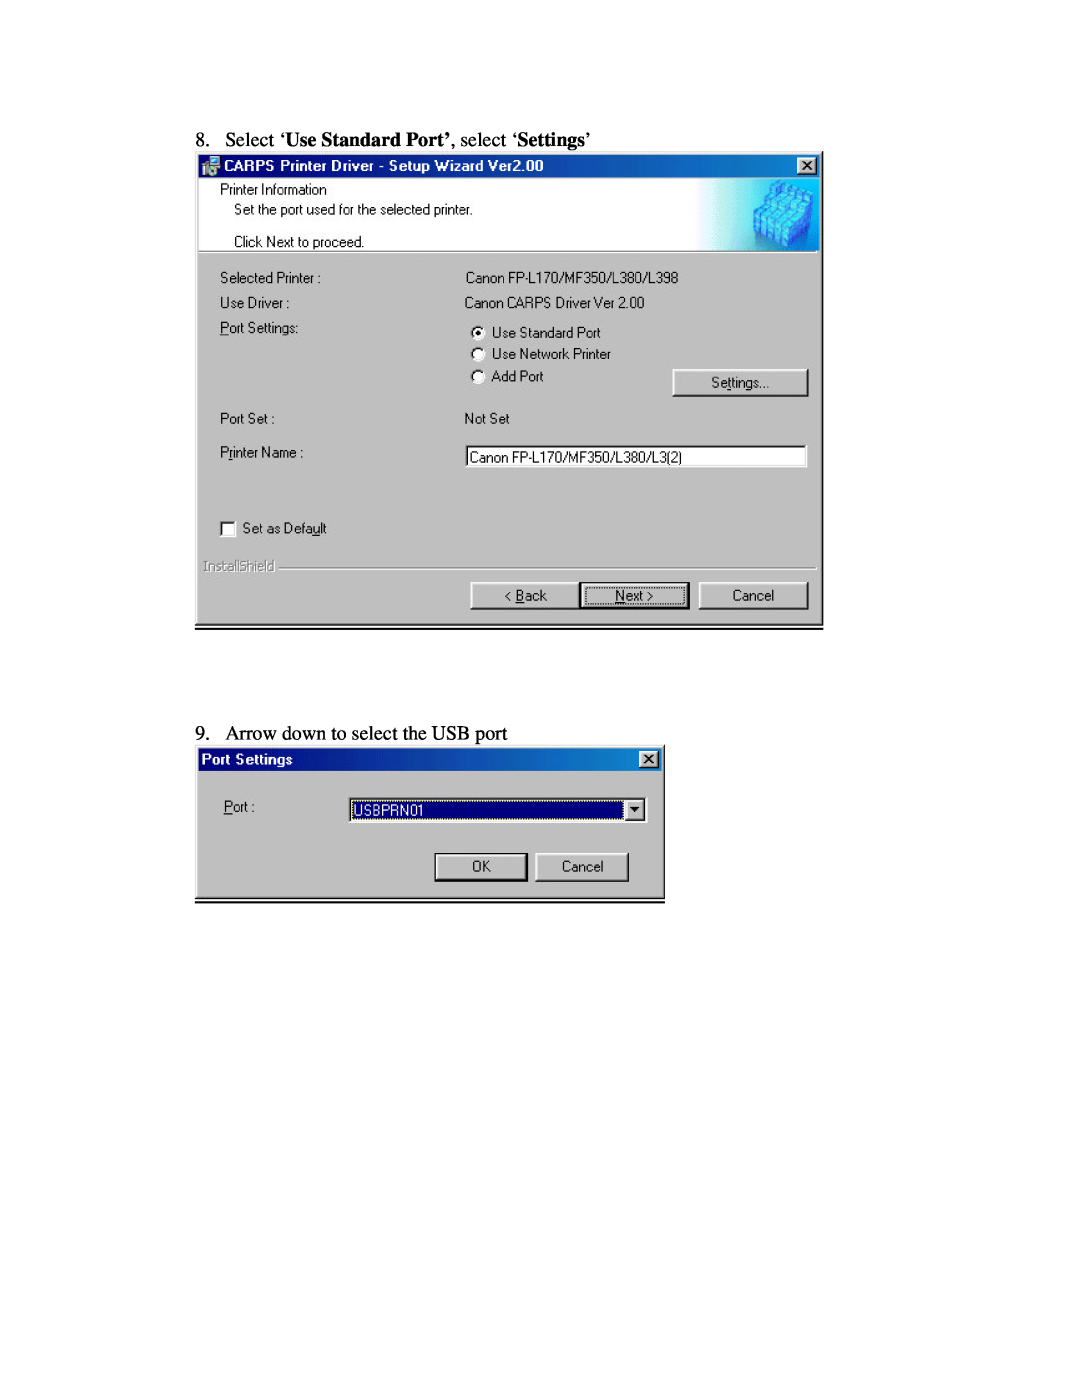 Canon FAX-L380 manual Select ‘Use Standard Port’, select ‘Settings’, Arrow down to select the USB port 